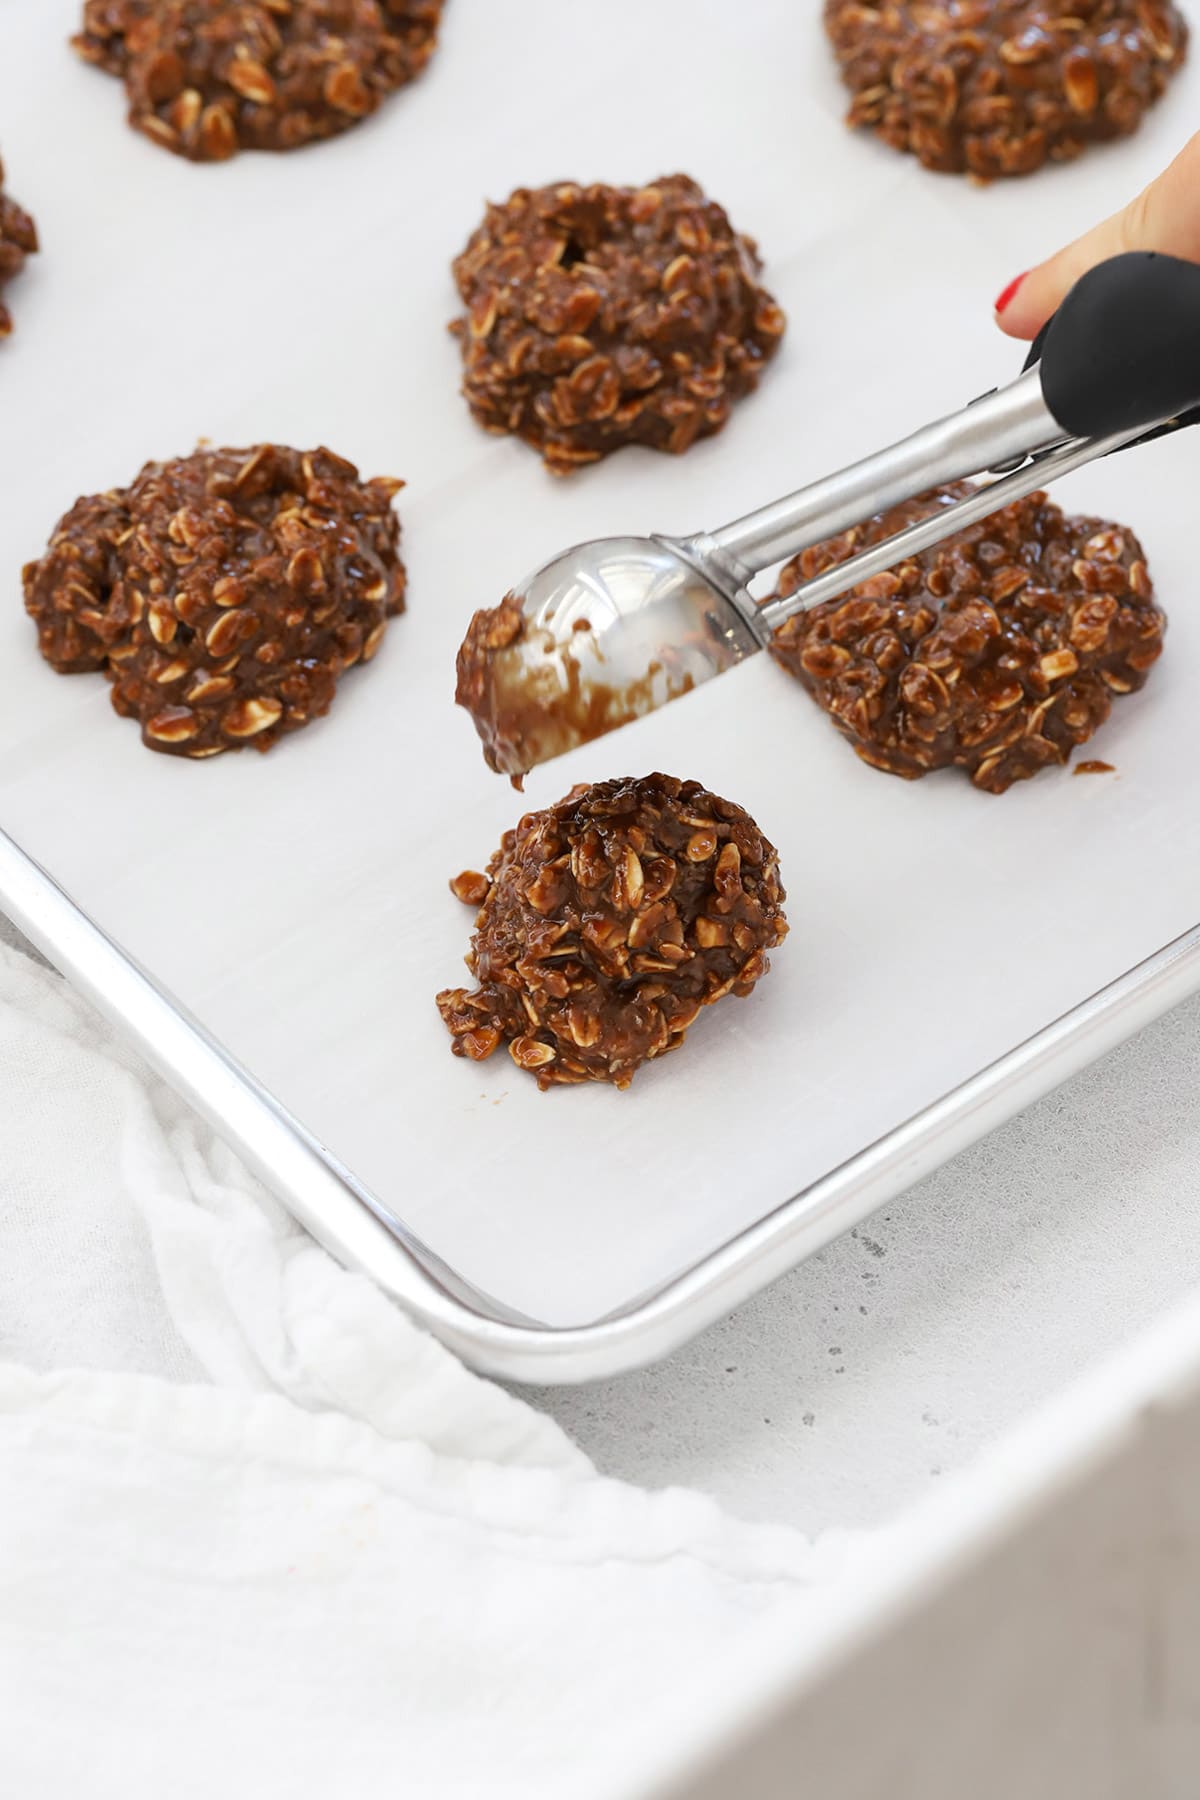 Scooping gluten-free no-bake cookies onto a baking sheet lined with parchment